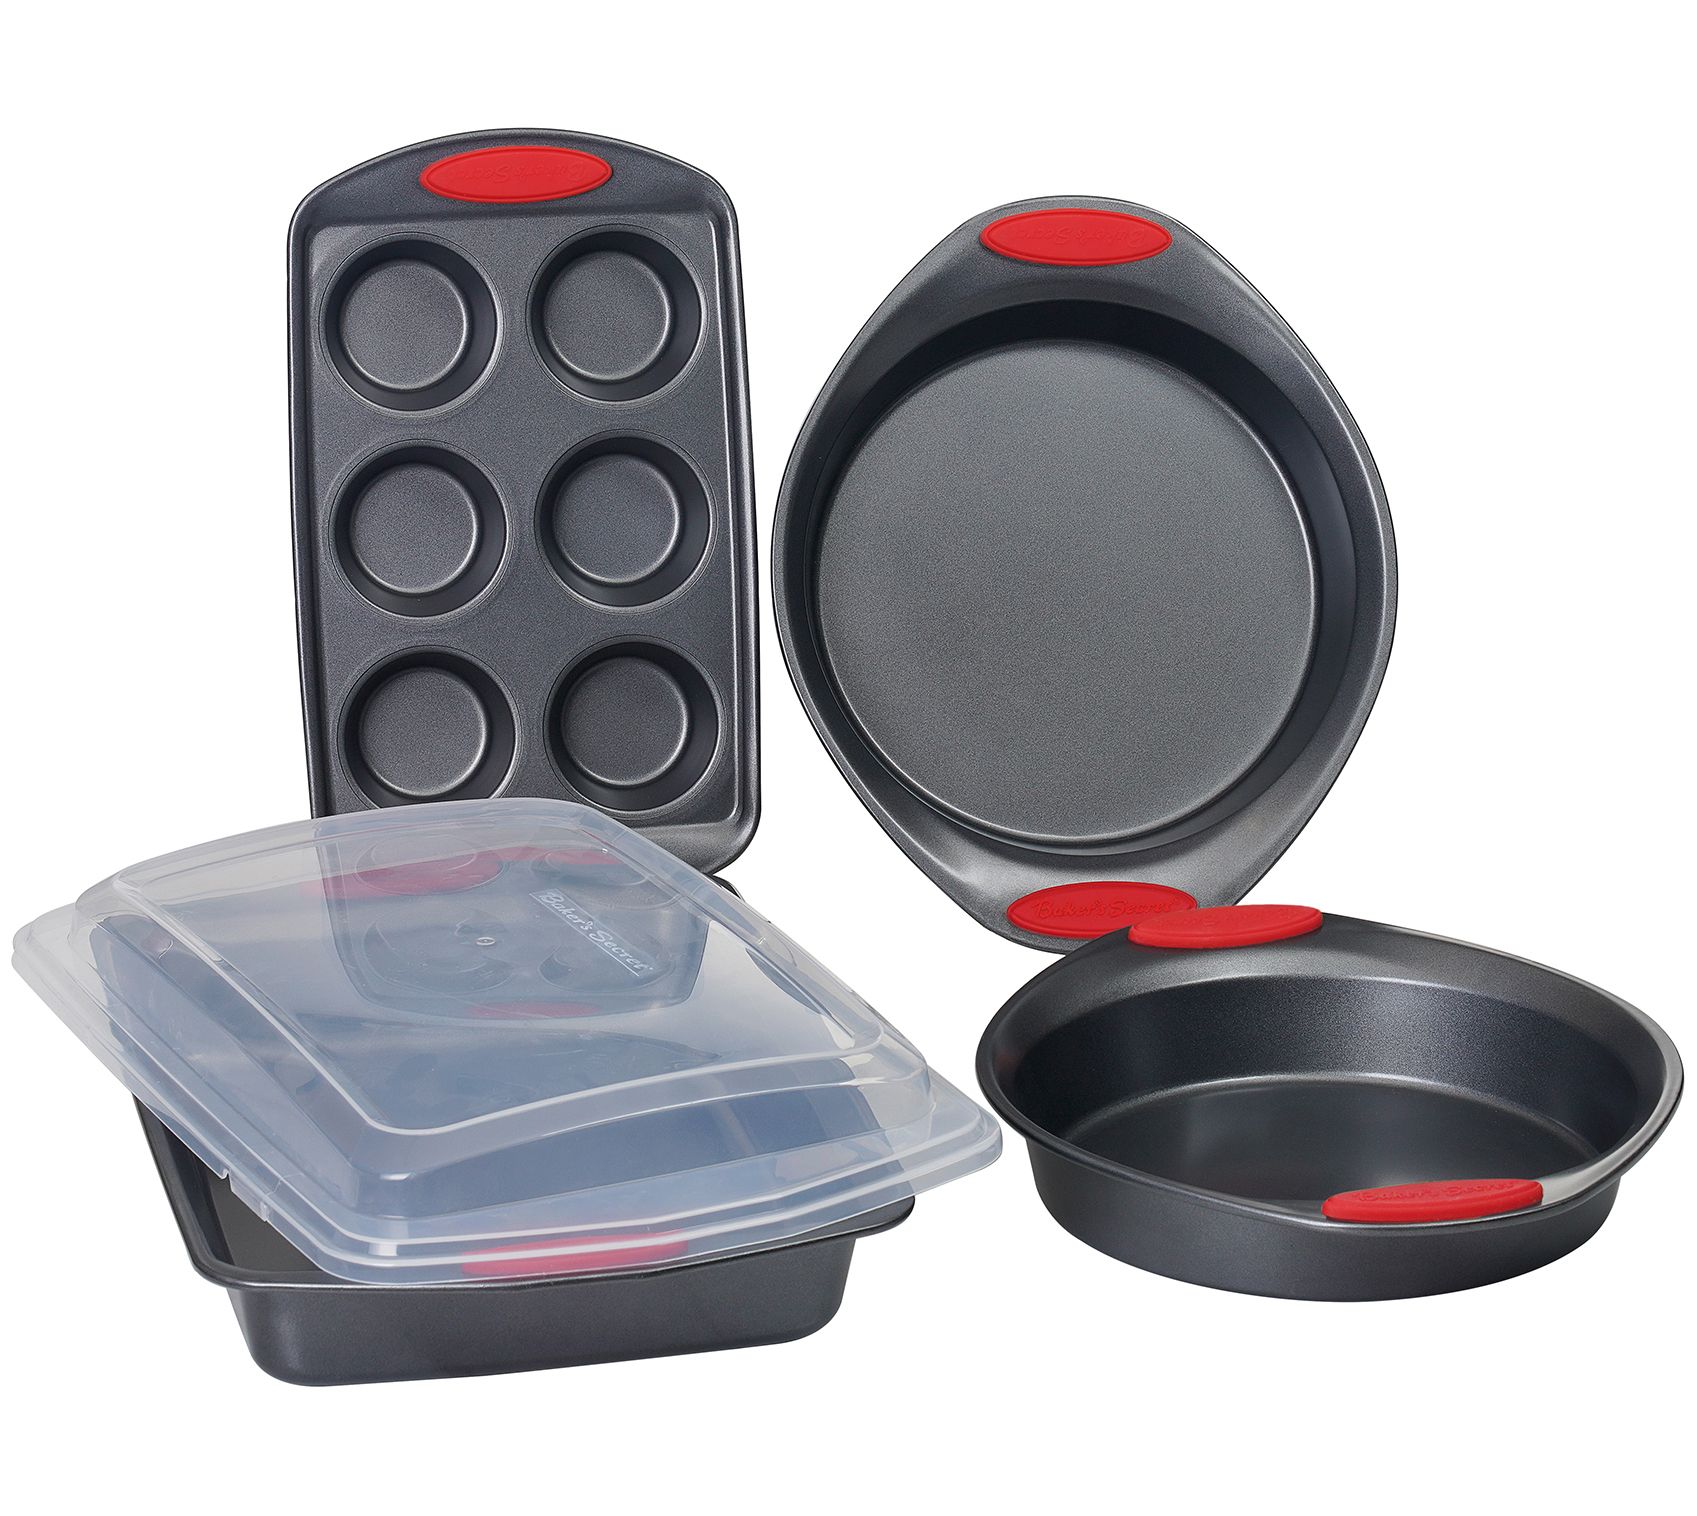 Anolon Advanced Nonstick 5-Piece Bakeware Set with Silicone Grips